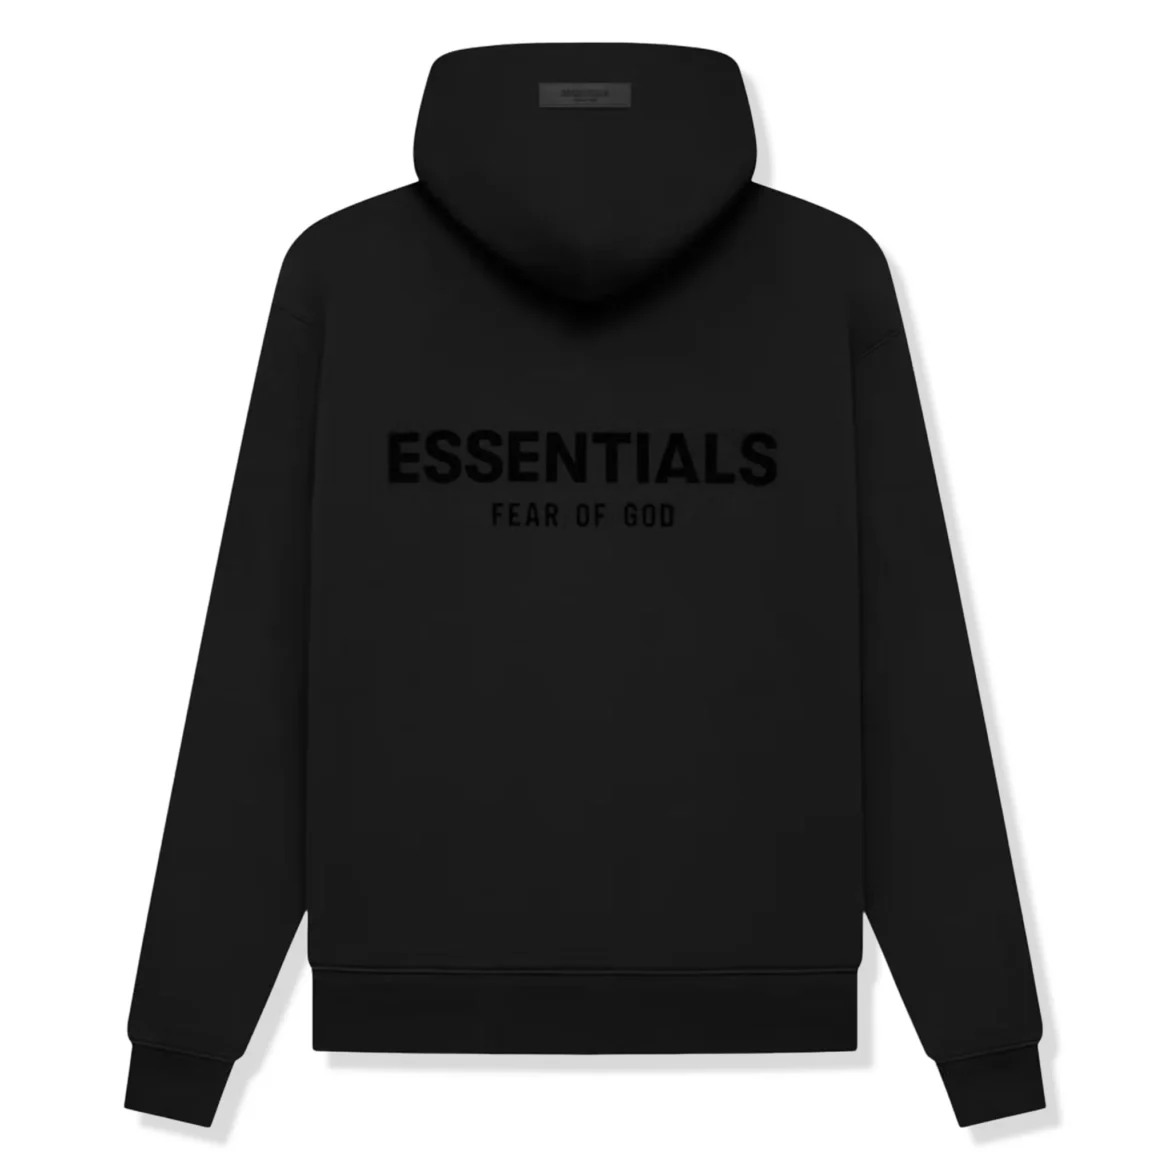 Essentials Hoodie and Essentials Clothing: A Must-Have for Every Wardrobe